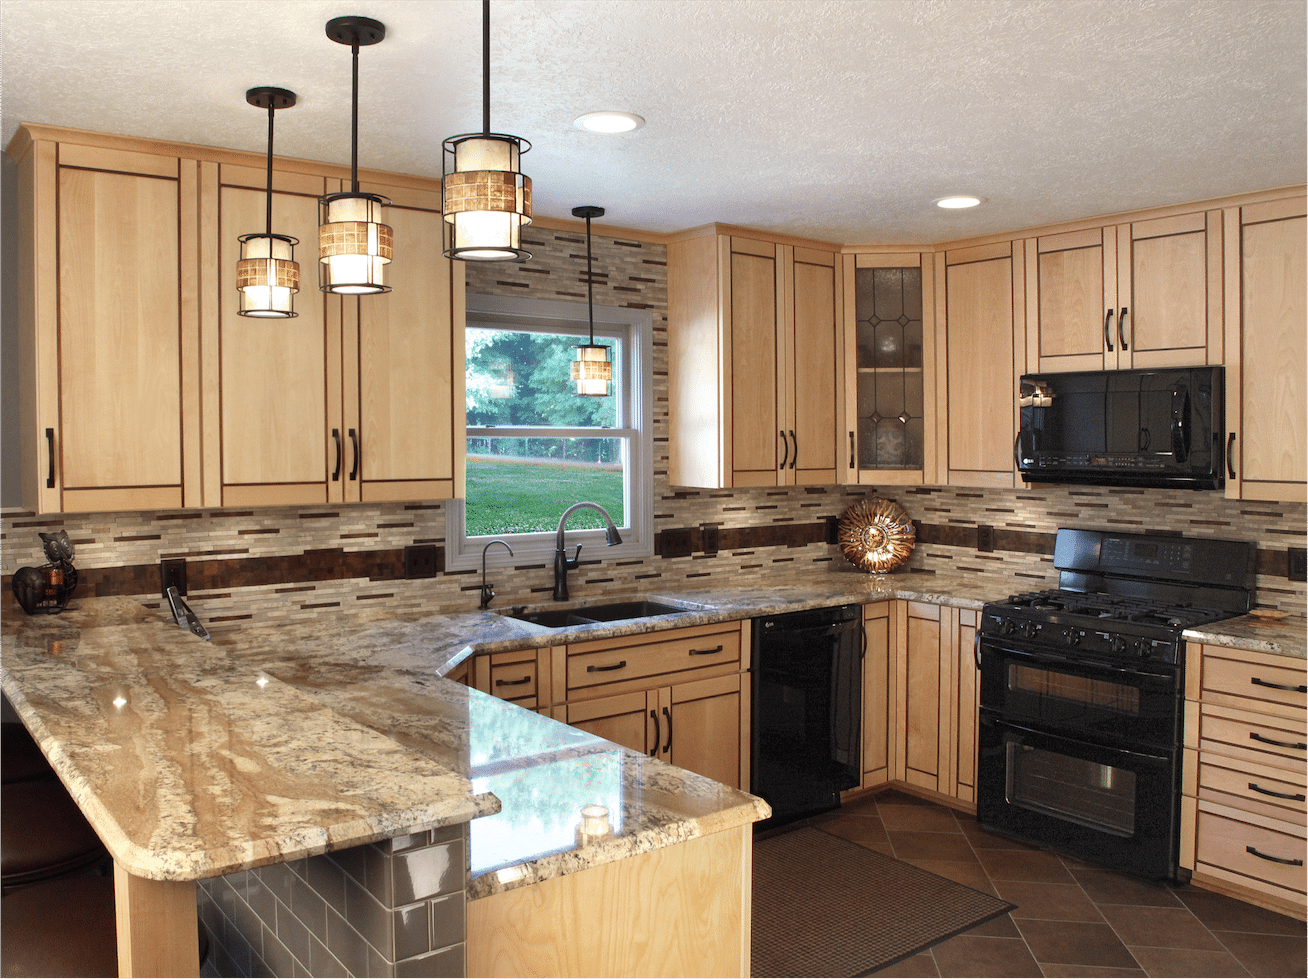 Modern kitchen remodeling and cabinet refacing